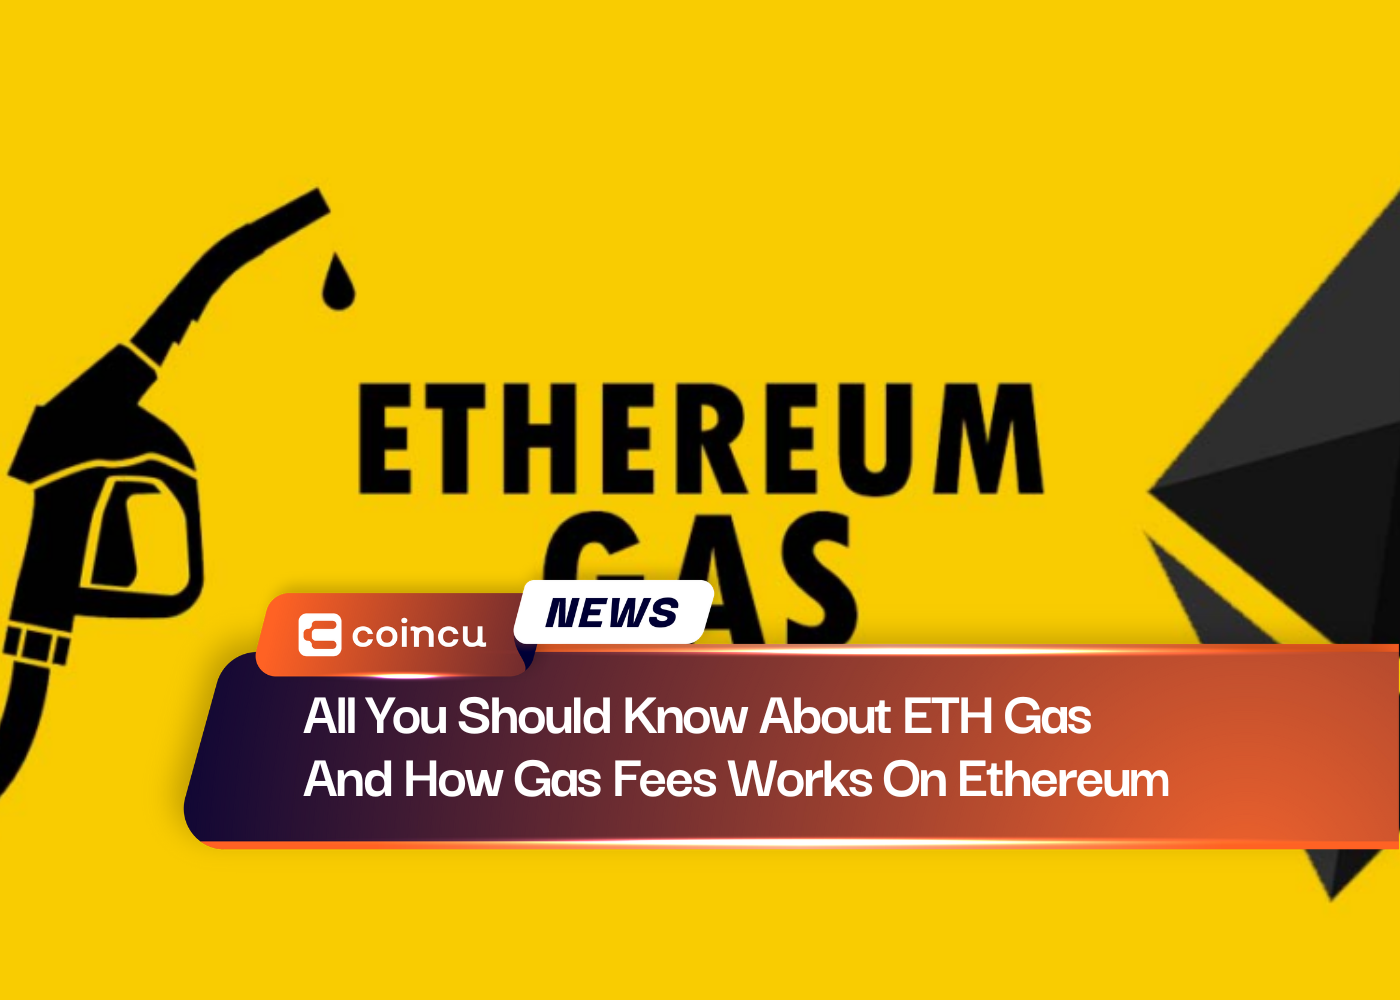 All You Should Know About ETH Gas And How Gas Fees Works On Ethereum